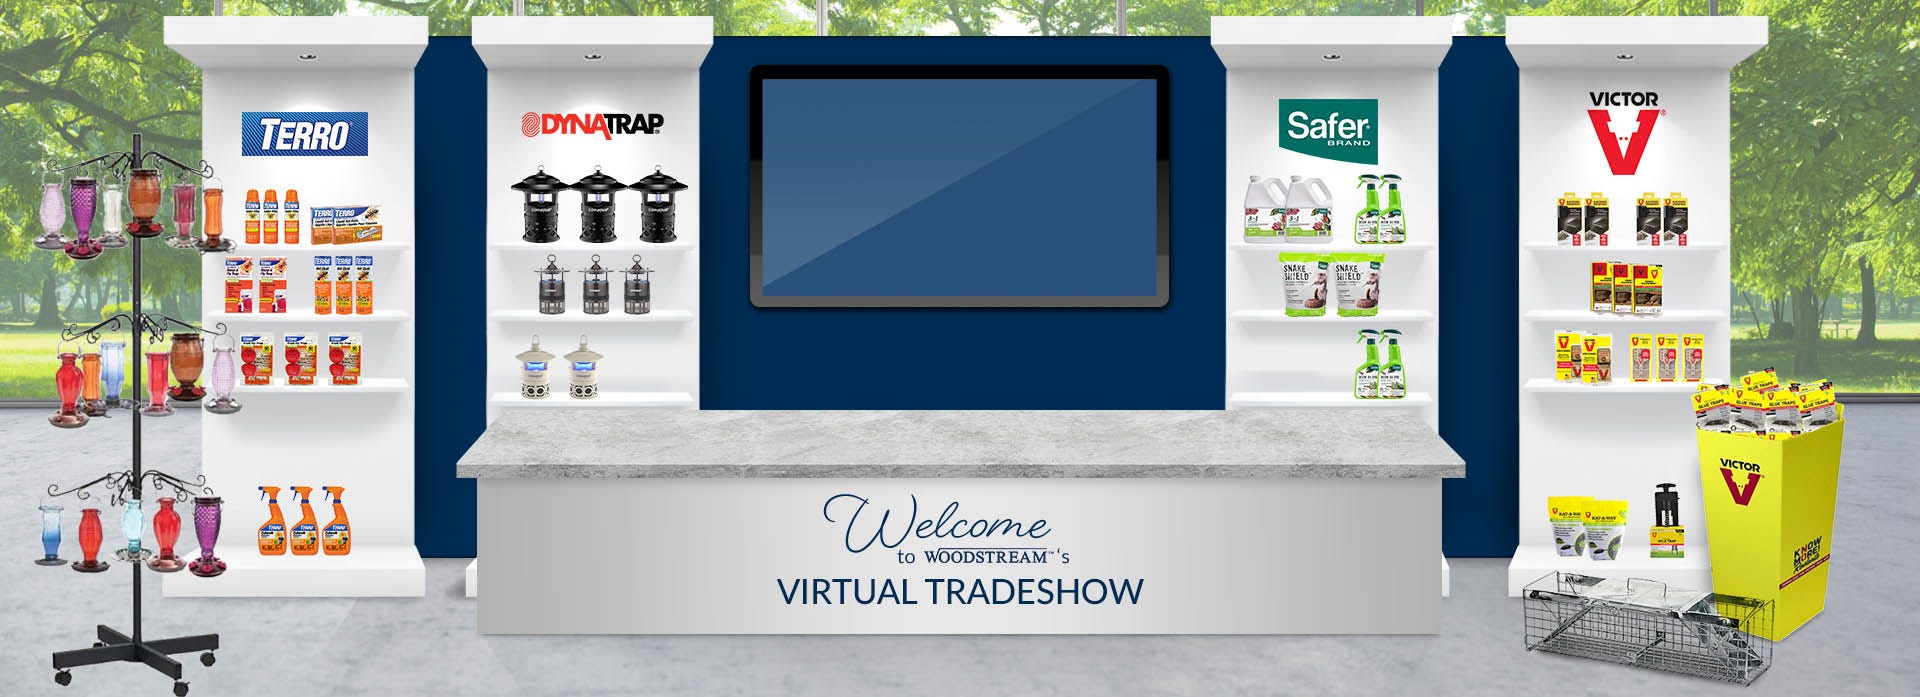 Welcome to the Woodstream Virtual Tradeshow